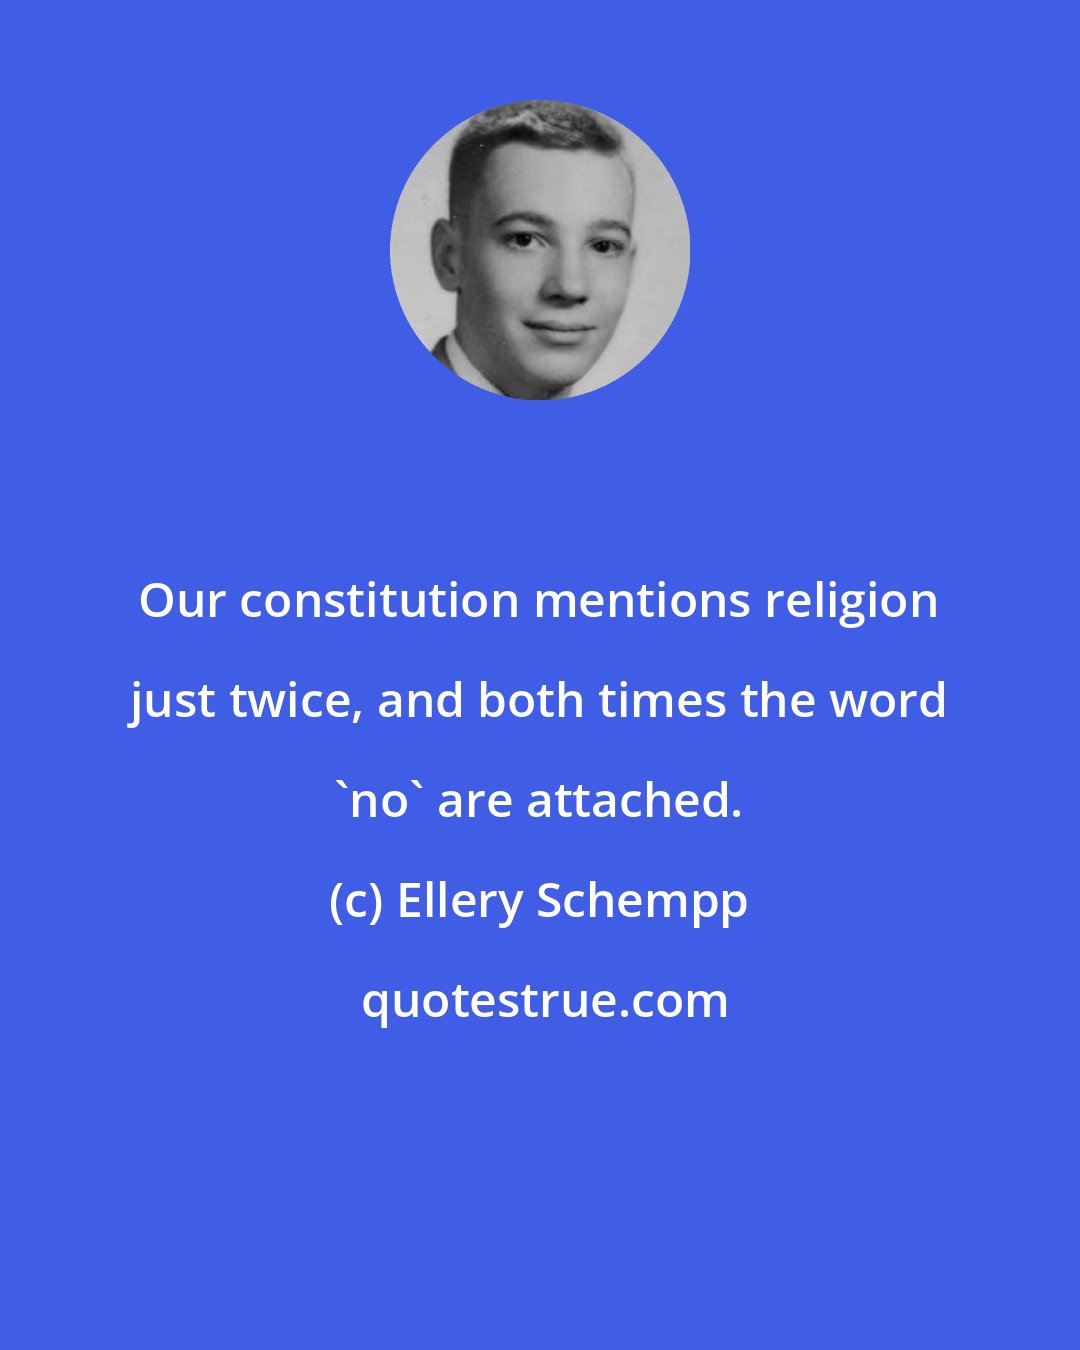 Ellery Schempp: Our constitution mentions religion just twice, and both times the word 'no' are attached.